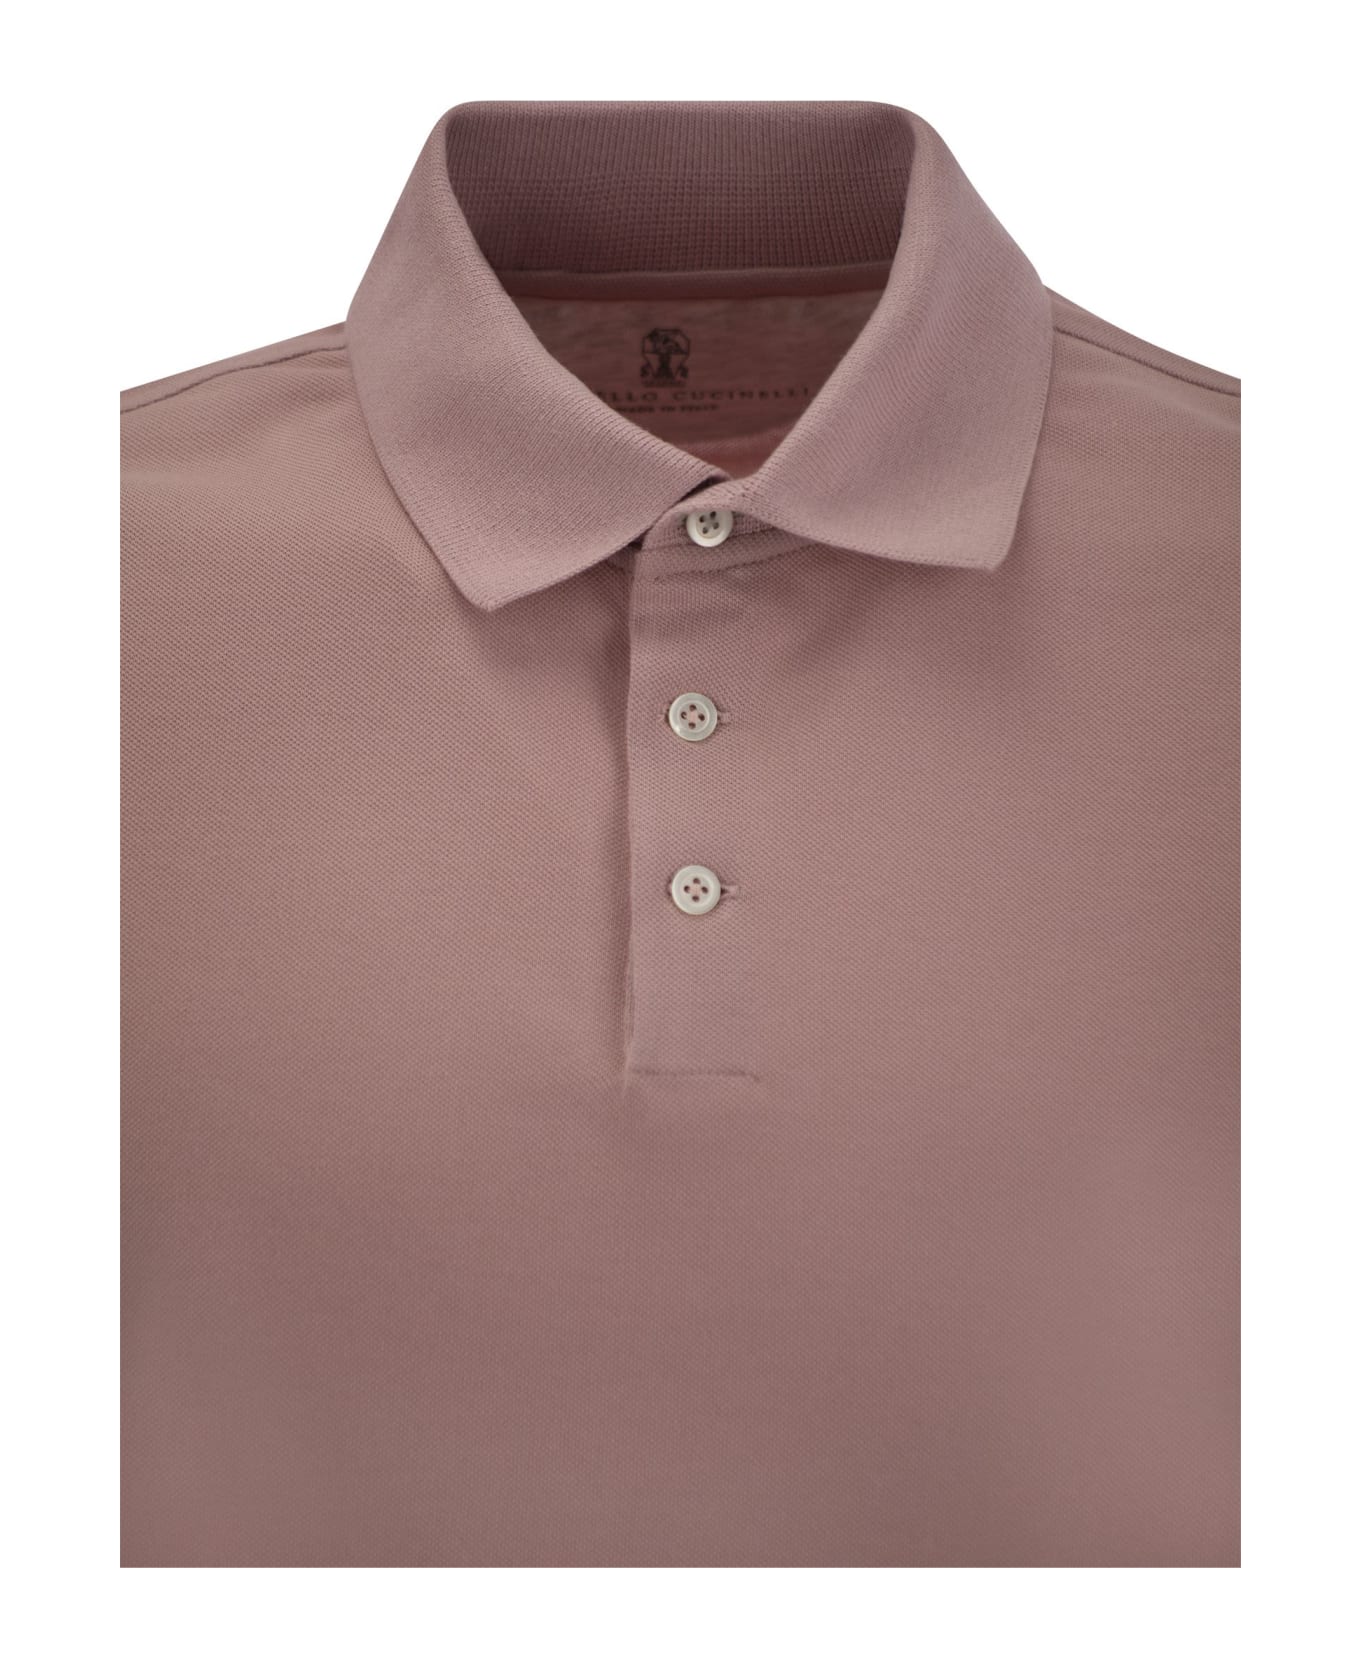 Brunello Cucinelli Cotton Jersey Polo Shirt - Pink ポロシャツ